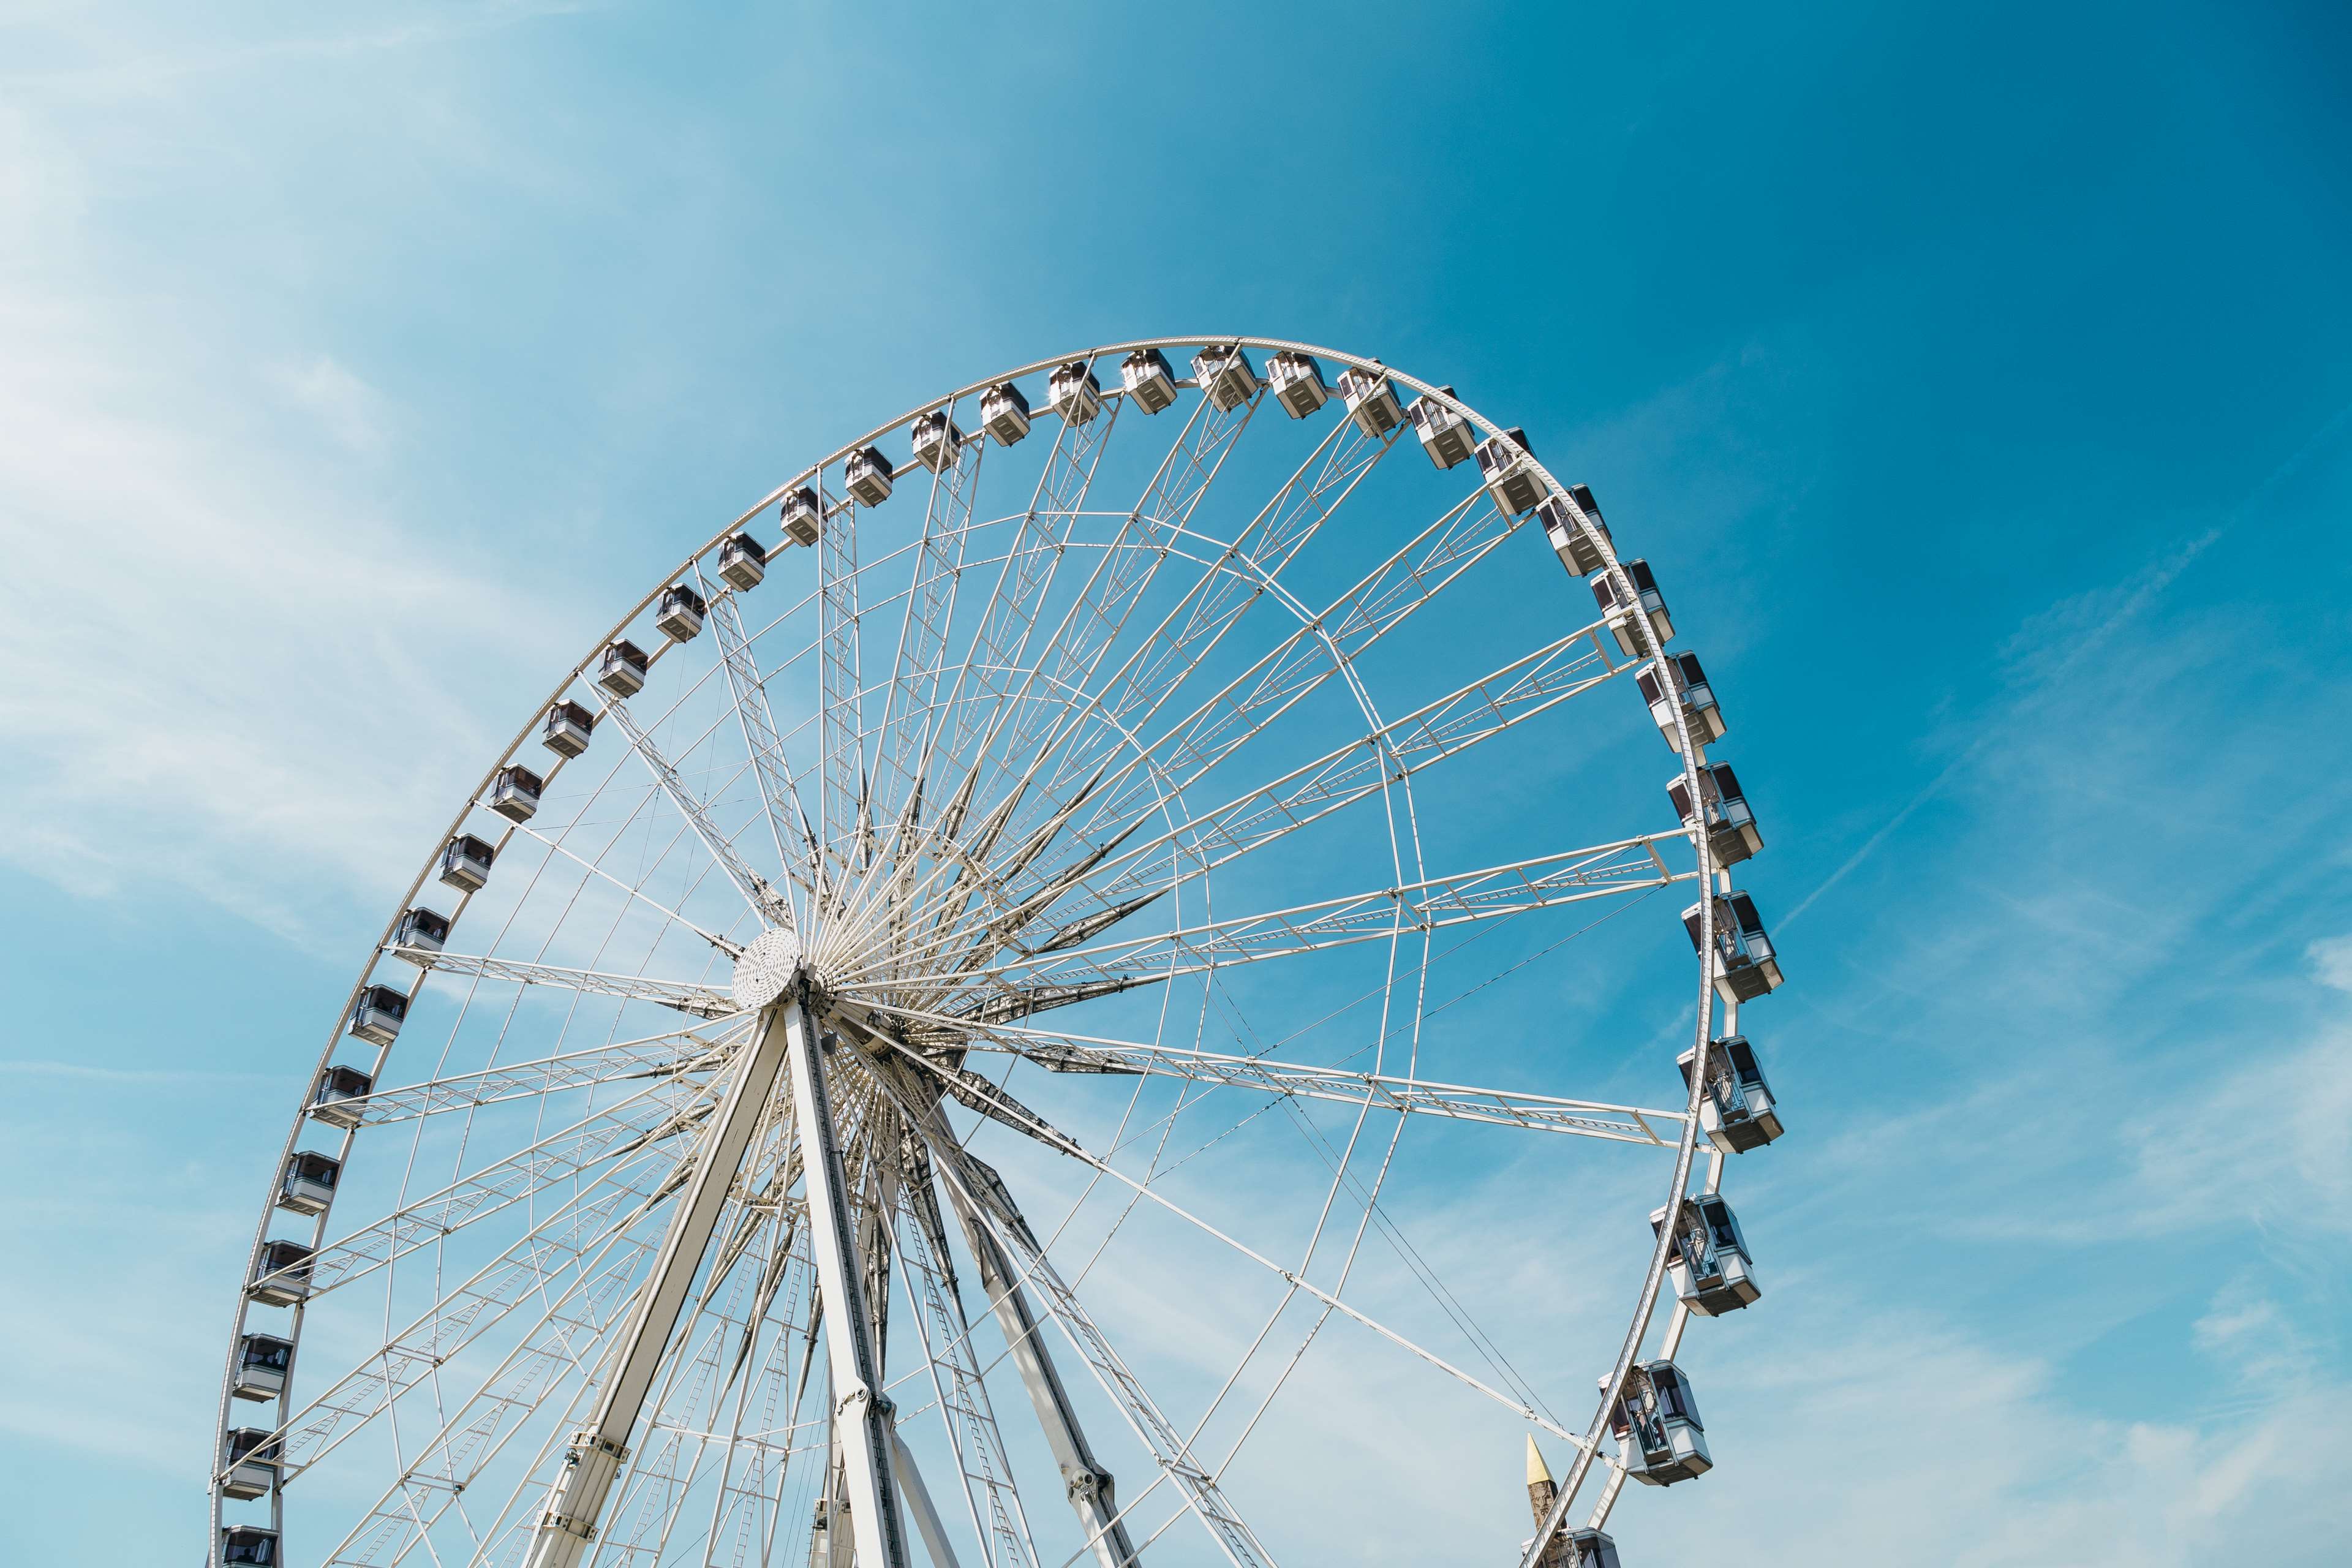 amusement park, blue sky, bright, carnival, clouds, daylight, entertainment, fairground, ferris wheel, fun, height, high, leisure, low angle shot, outdoors, round, sky, spin, turning, wheel 4k wallpaper